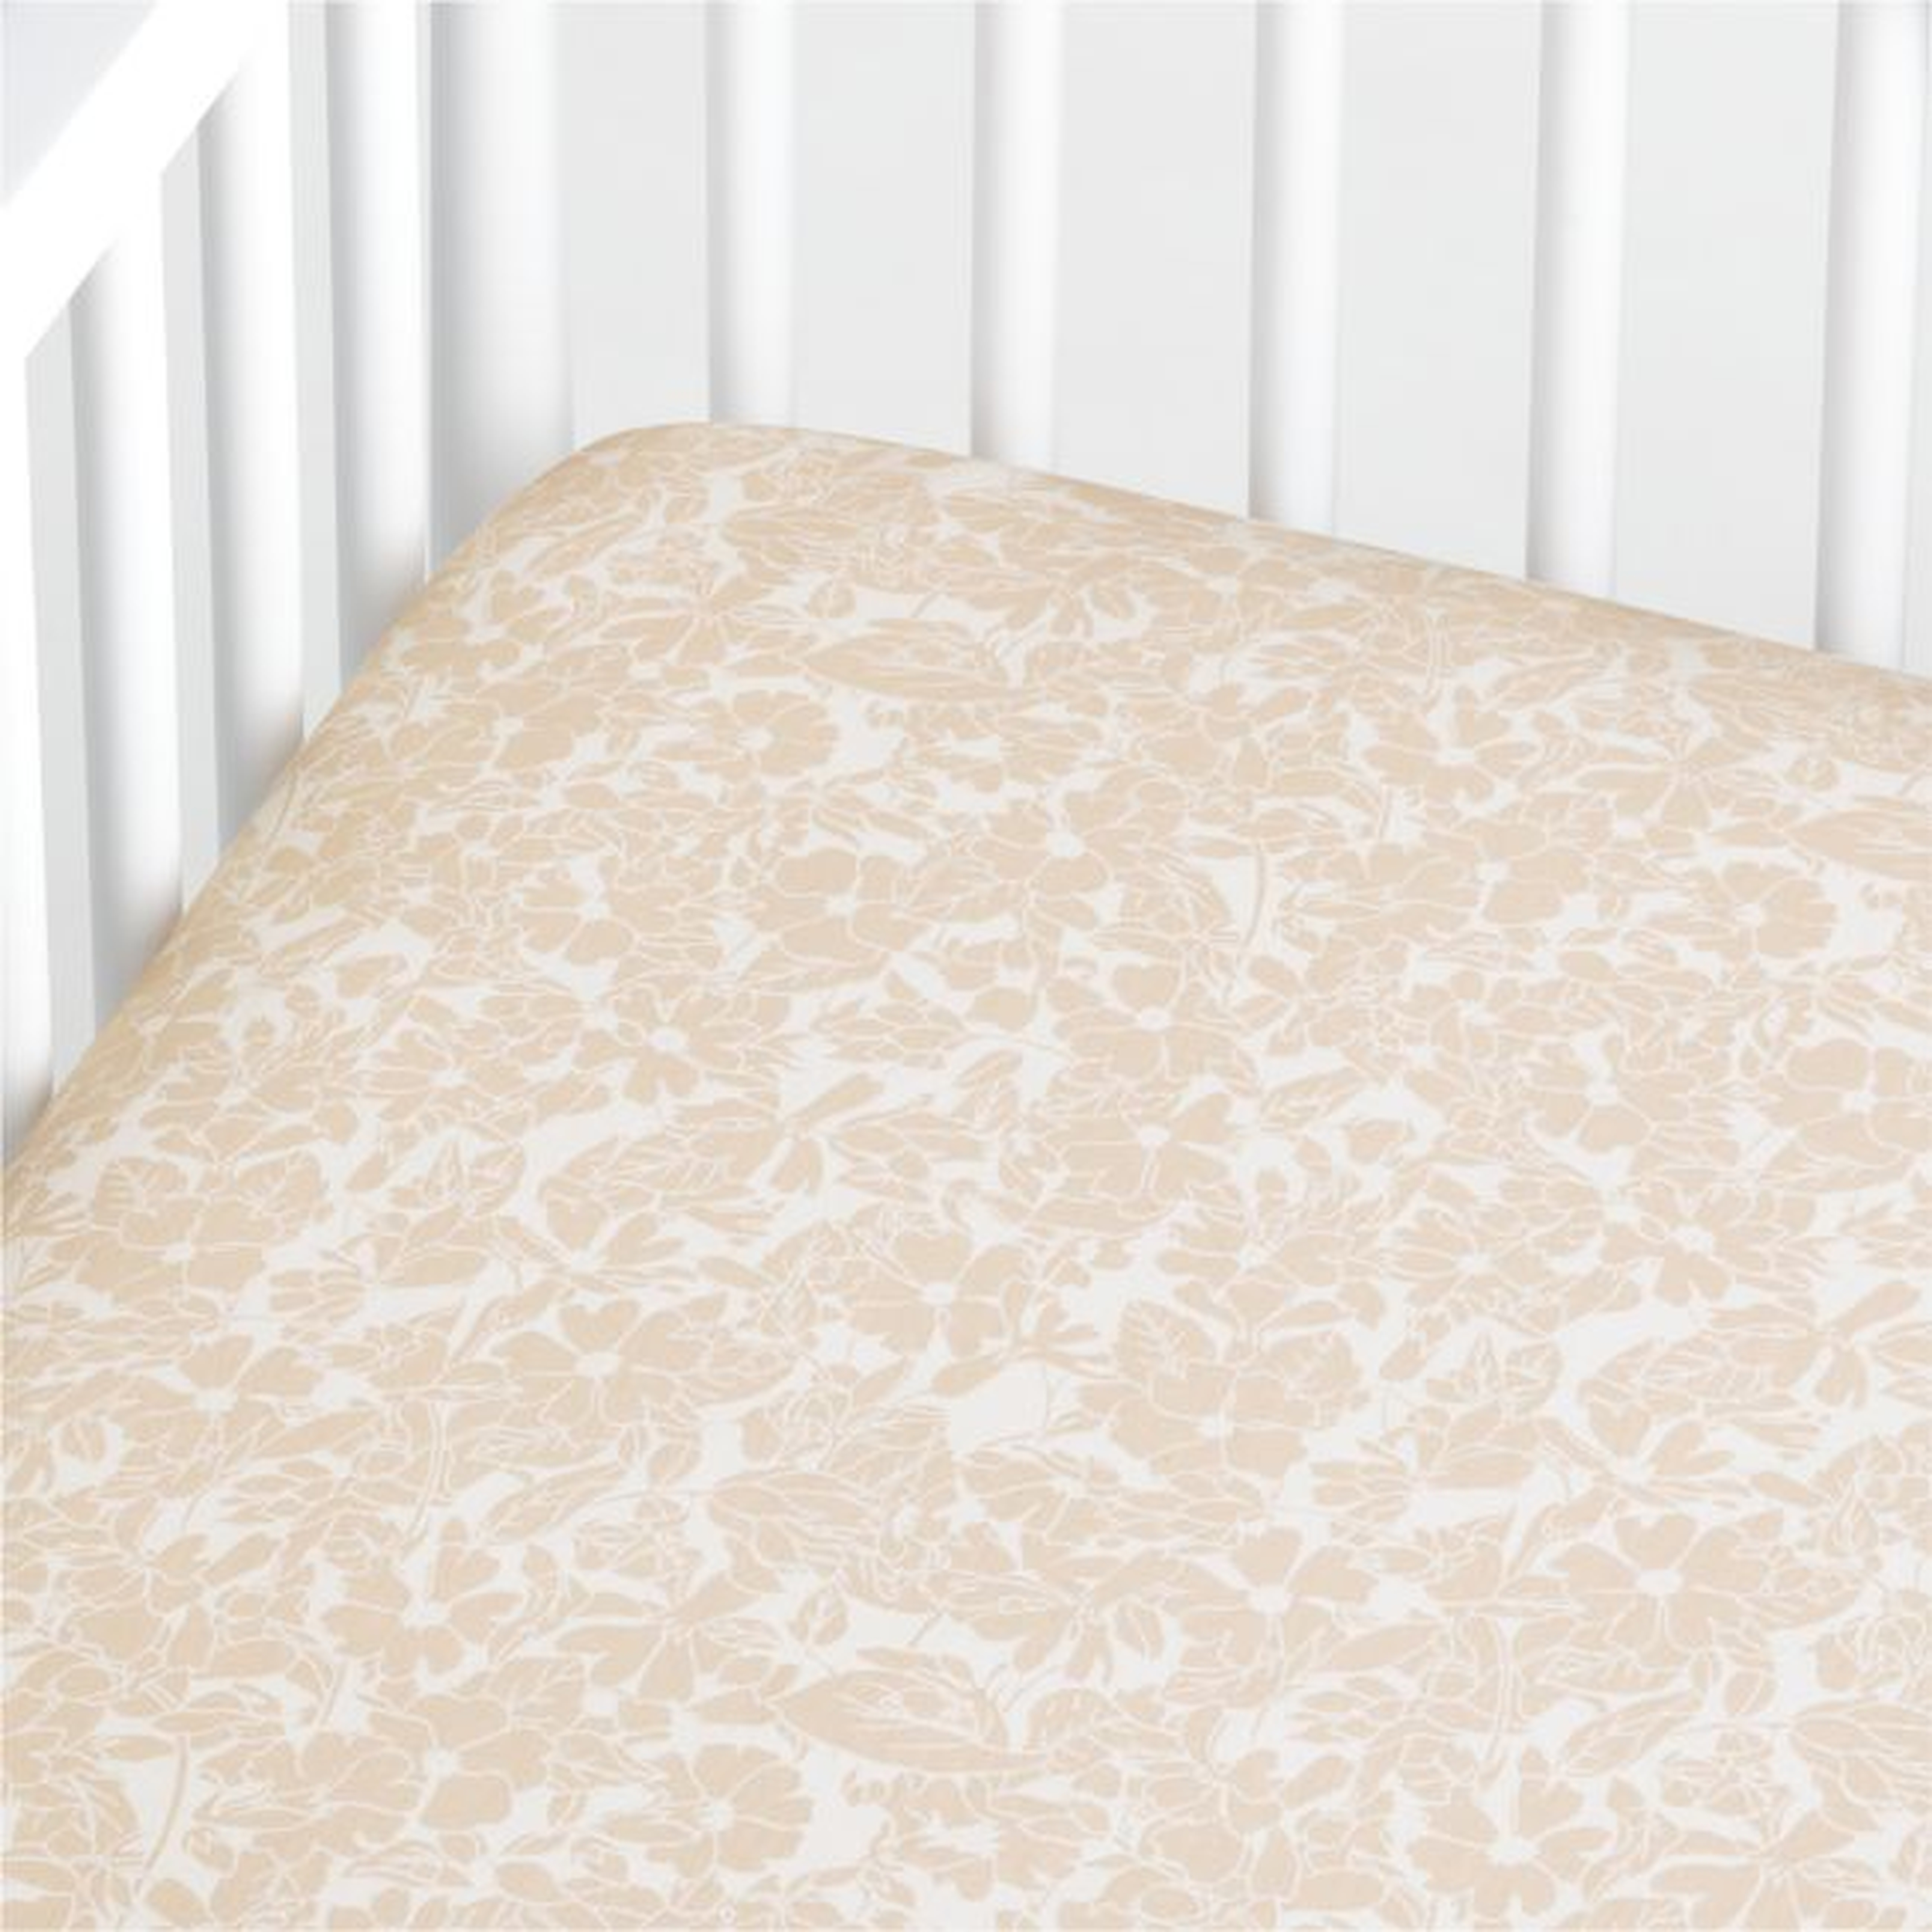 Ellsworth Floral Organic Crib Fitted Sheet - Crate and Barrel